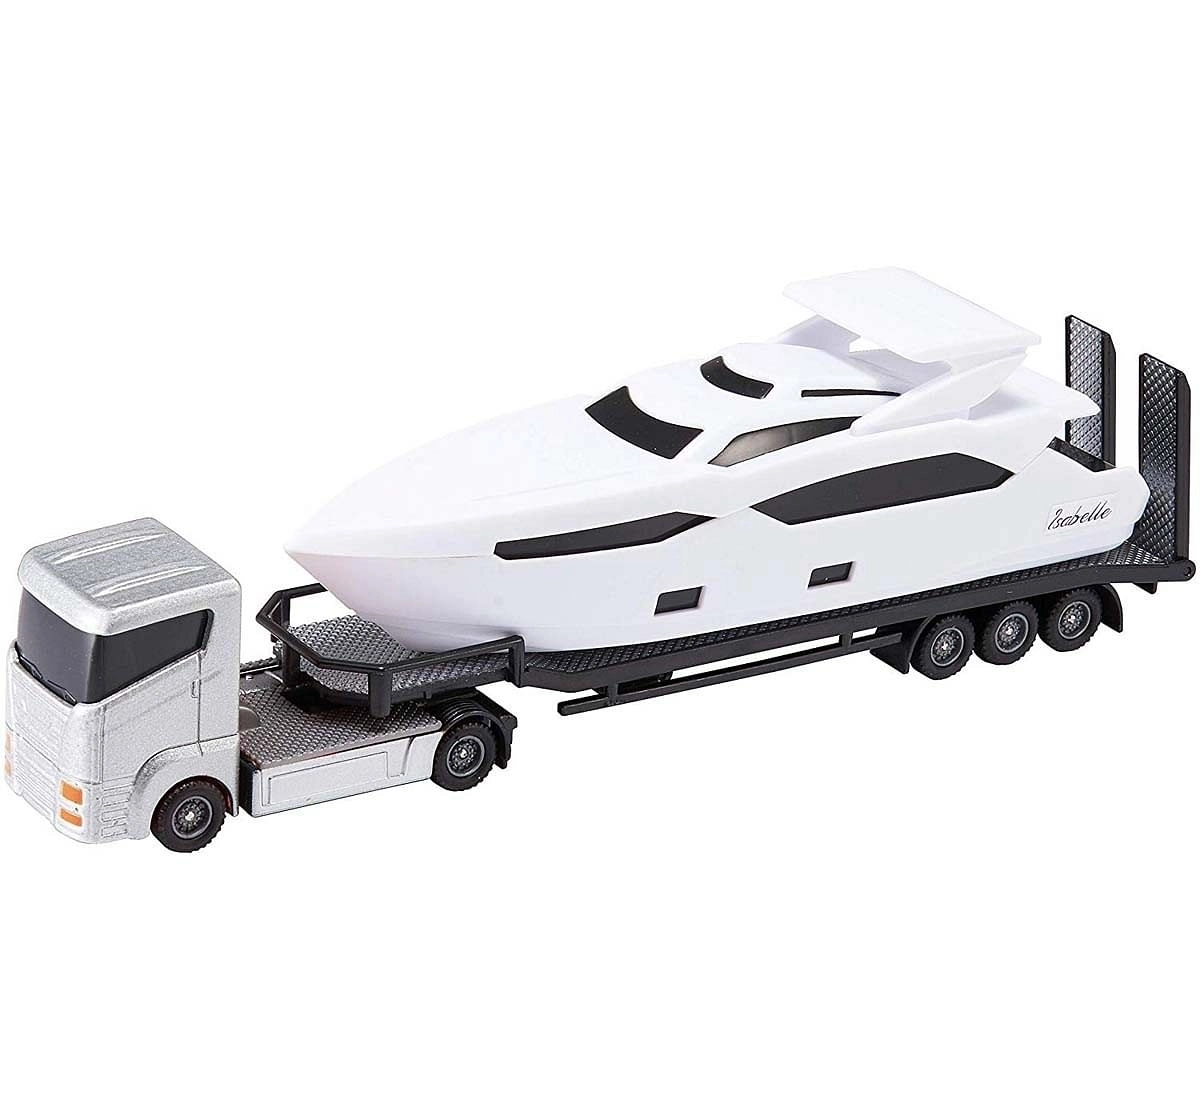 Teamsterz Sea Cruiser Transporter - White Vehicles for Kids age 3Y+